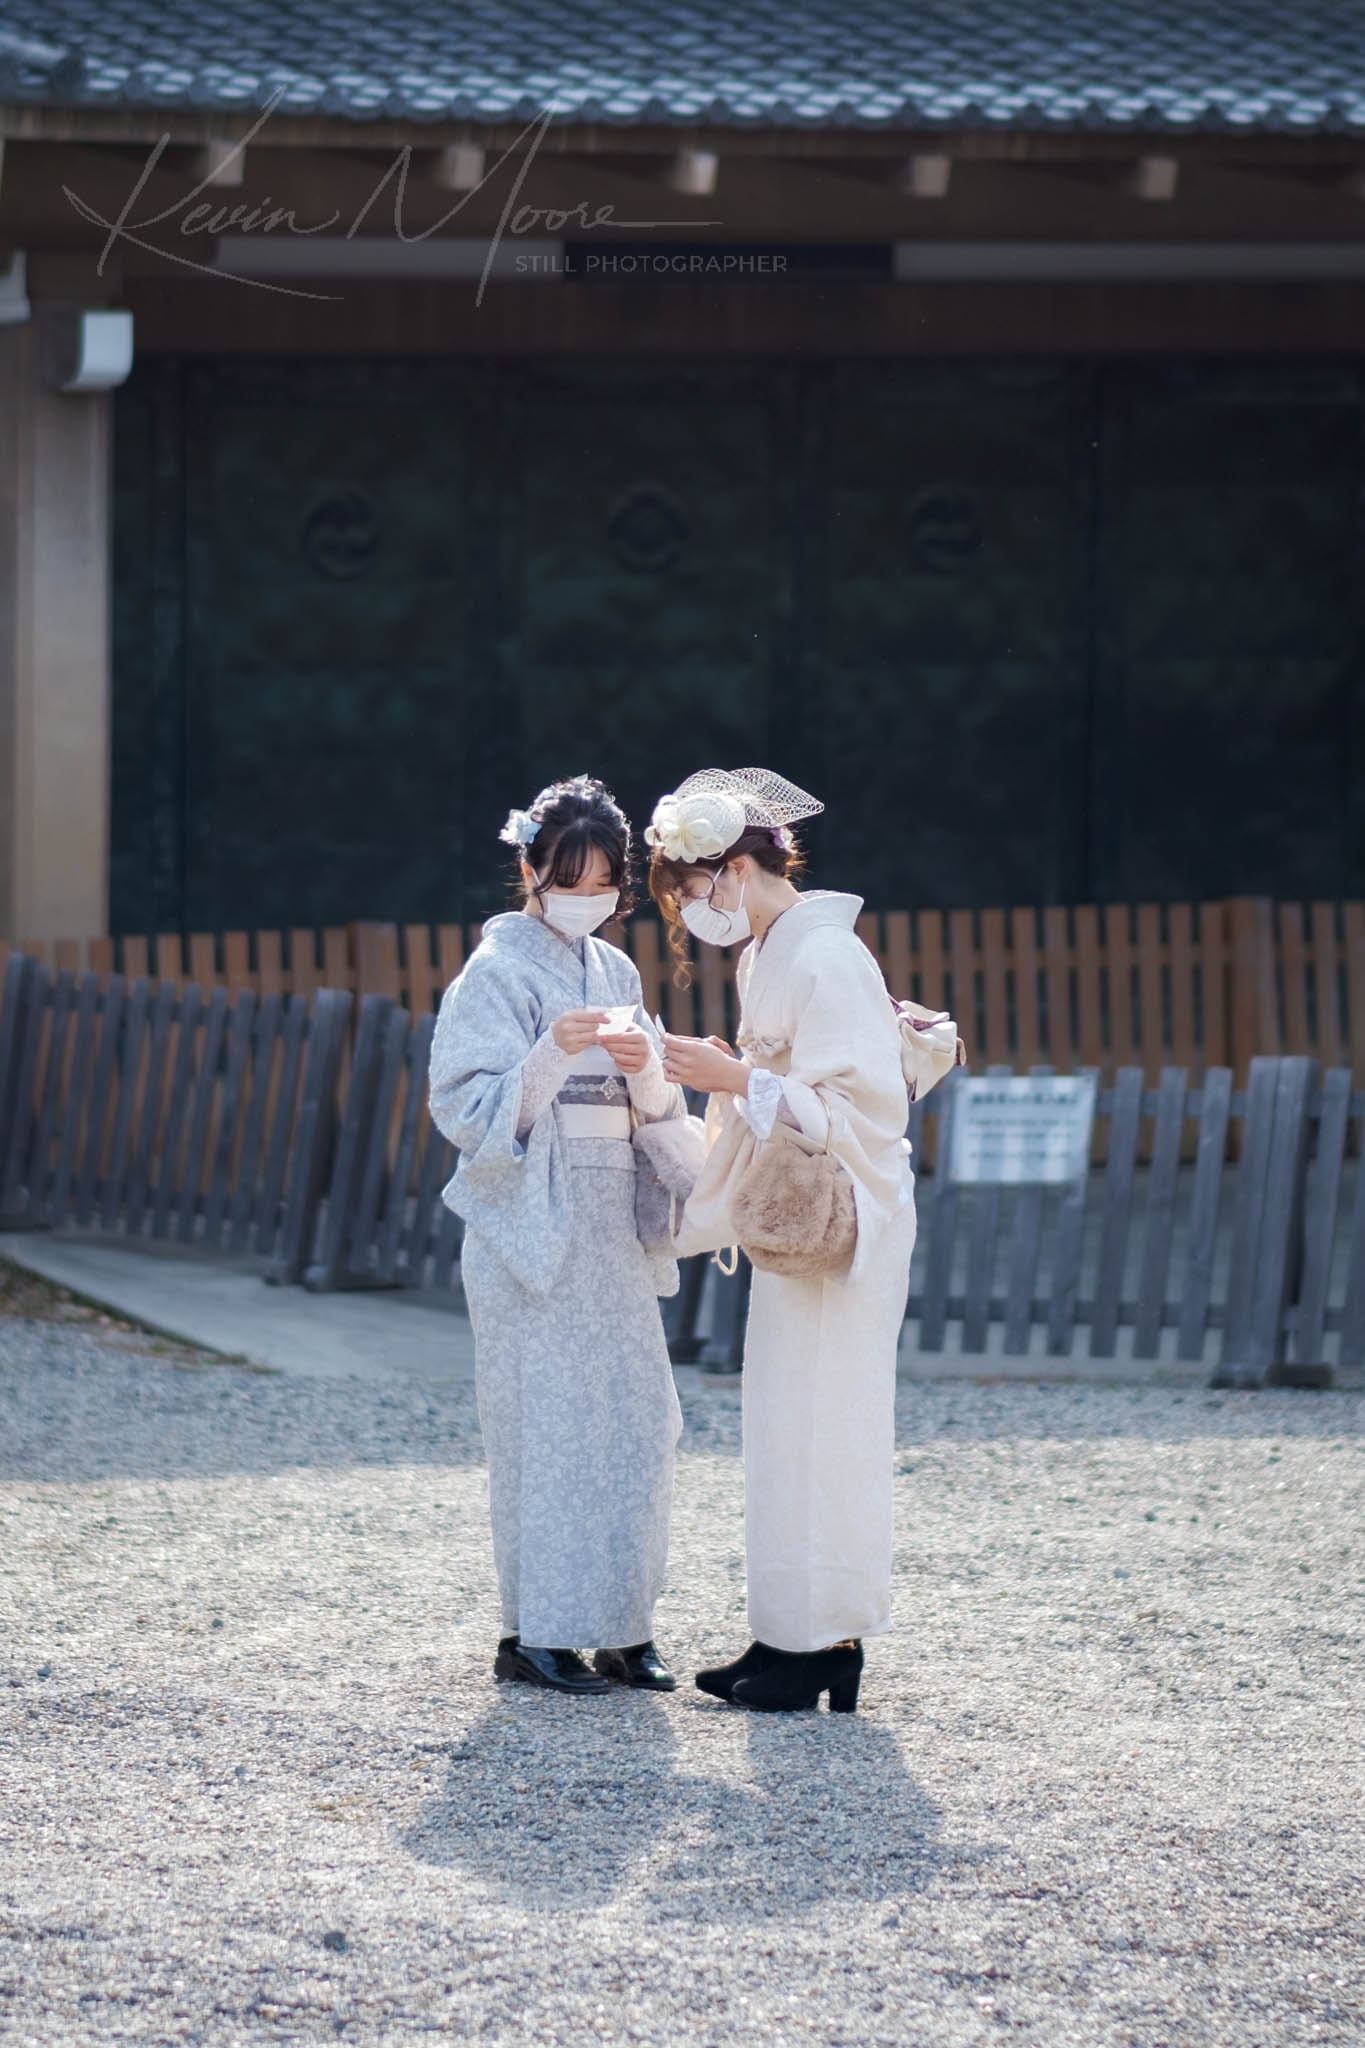 Modern and traditional blend in a conversation between two kimono-clad individuals in Japan